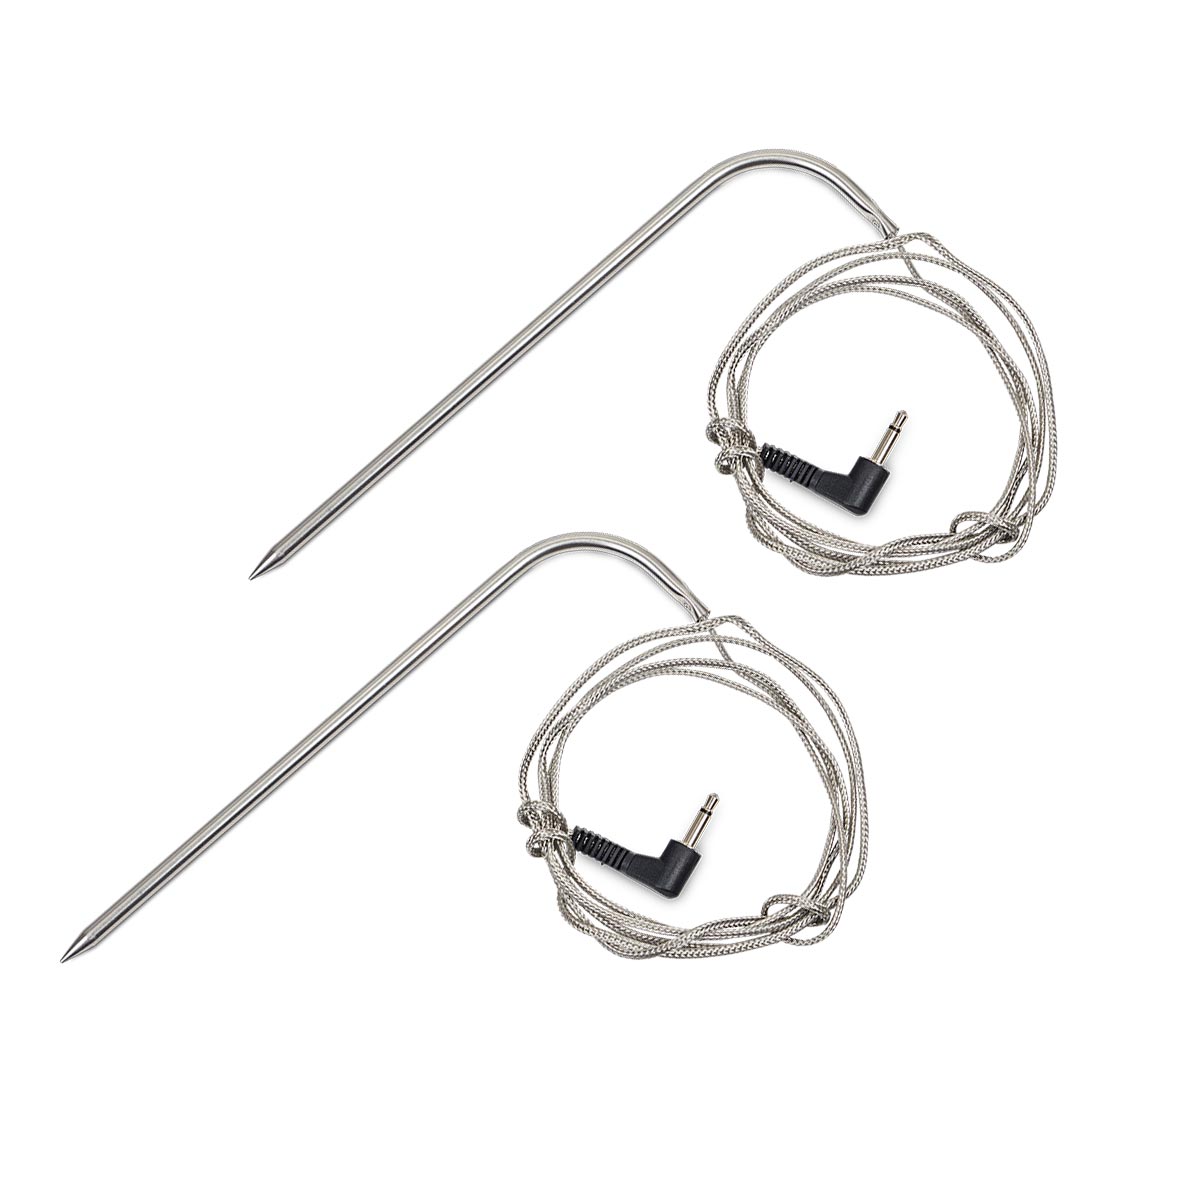 Louisiana Grills Replacement Meat Probes (2-pack) 30860